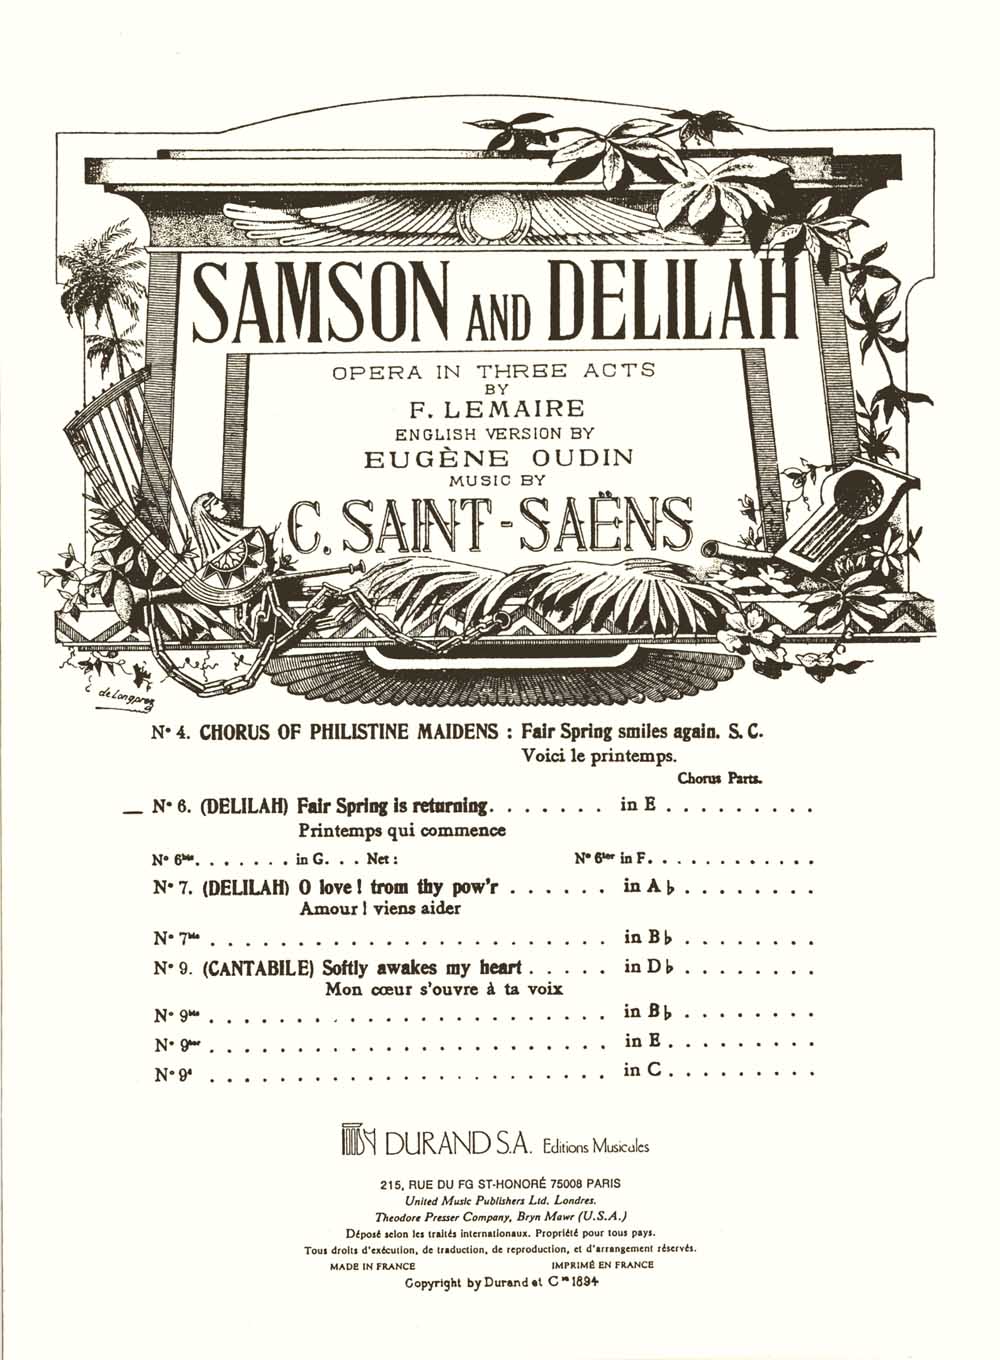 Camille Saint-Sans: Samson and Delilah no 6 in E: Vocal and Piano: Vocal Score